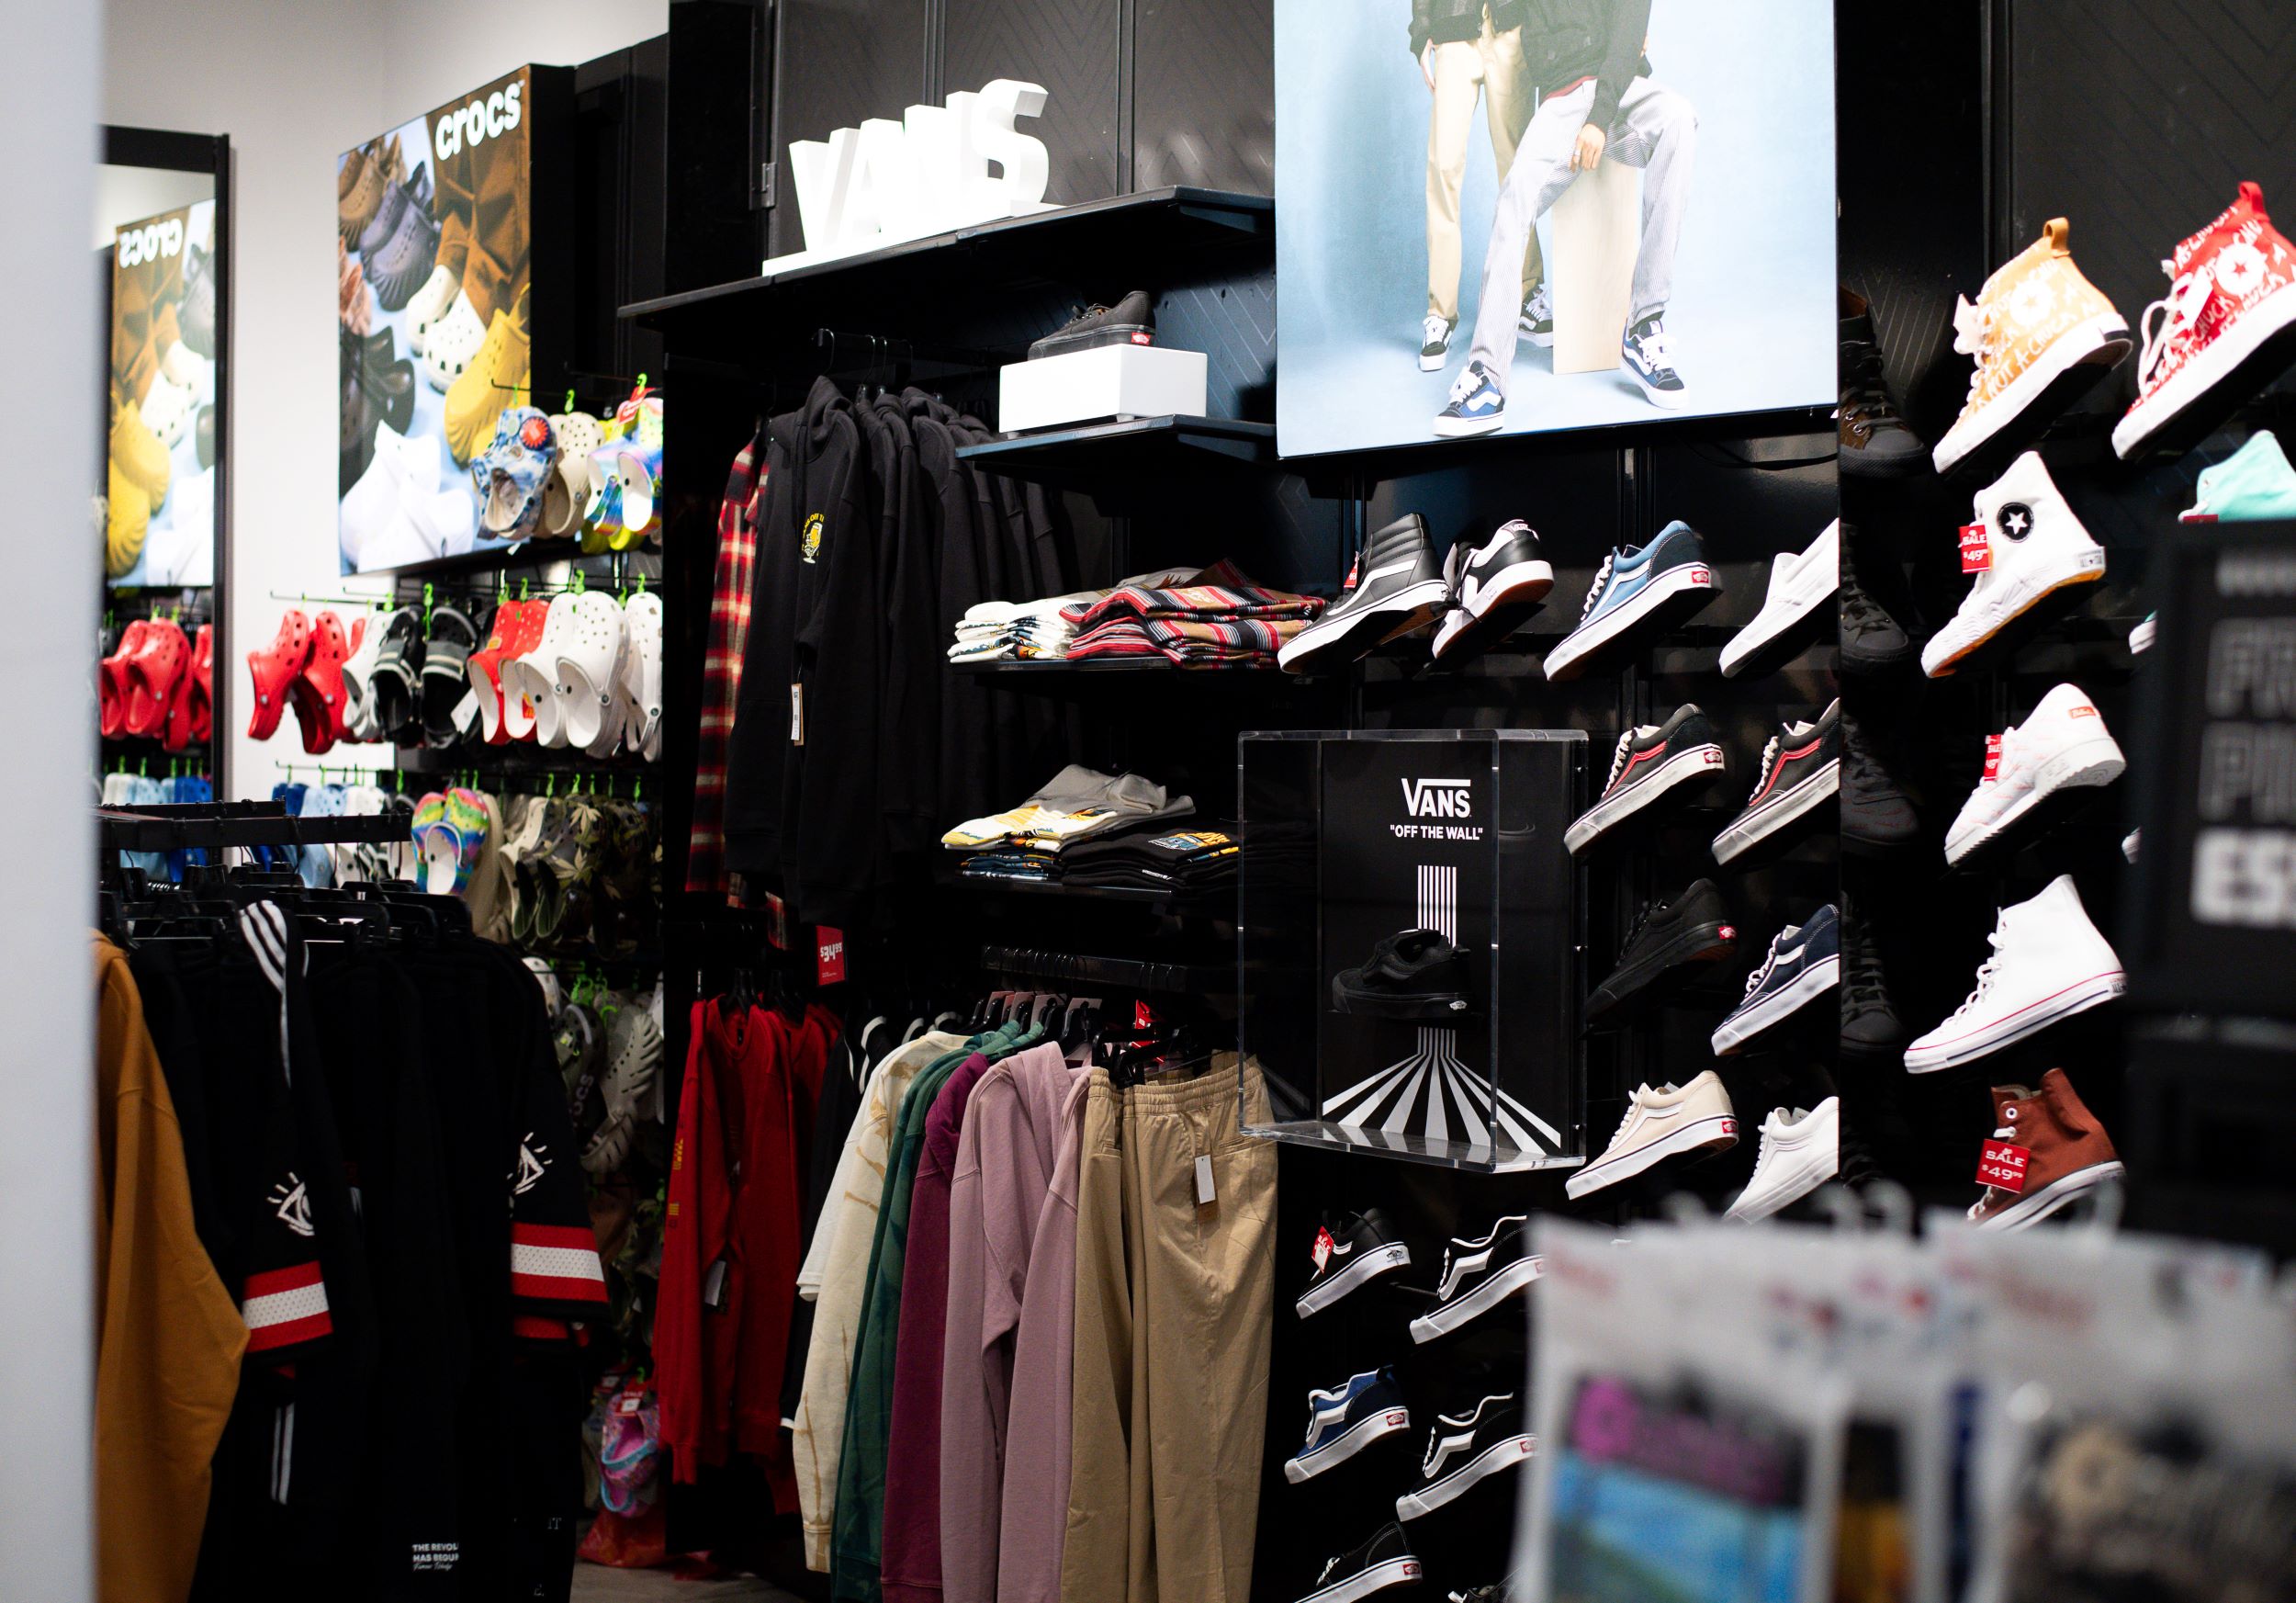 Interior of a clothing and shoe store with various branded merchandise like crocs and vans displayed on shelves and hanging racks. a colorful and organized space.